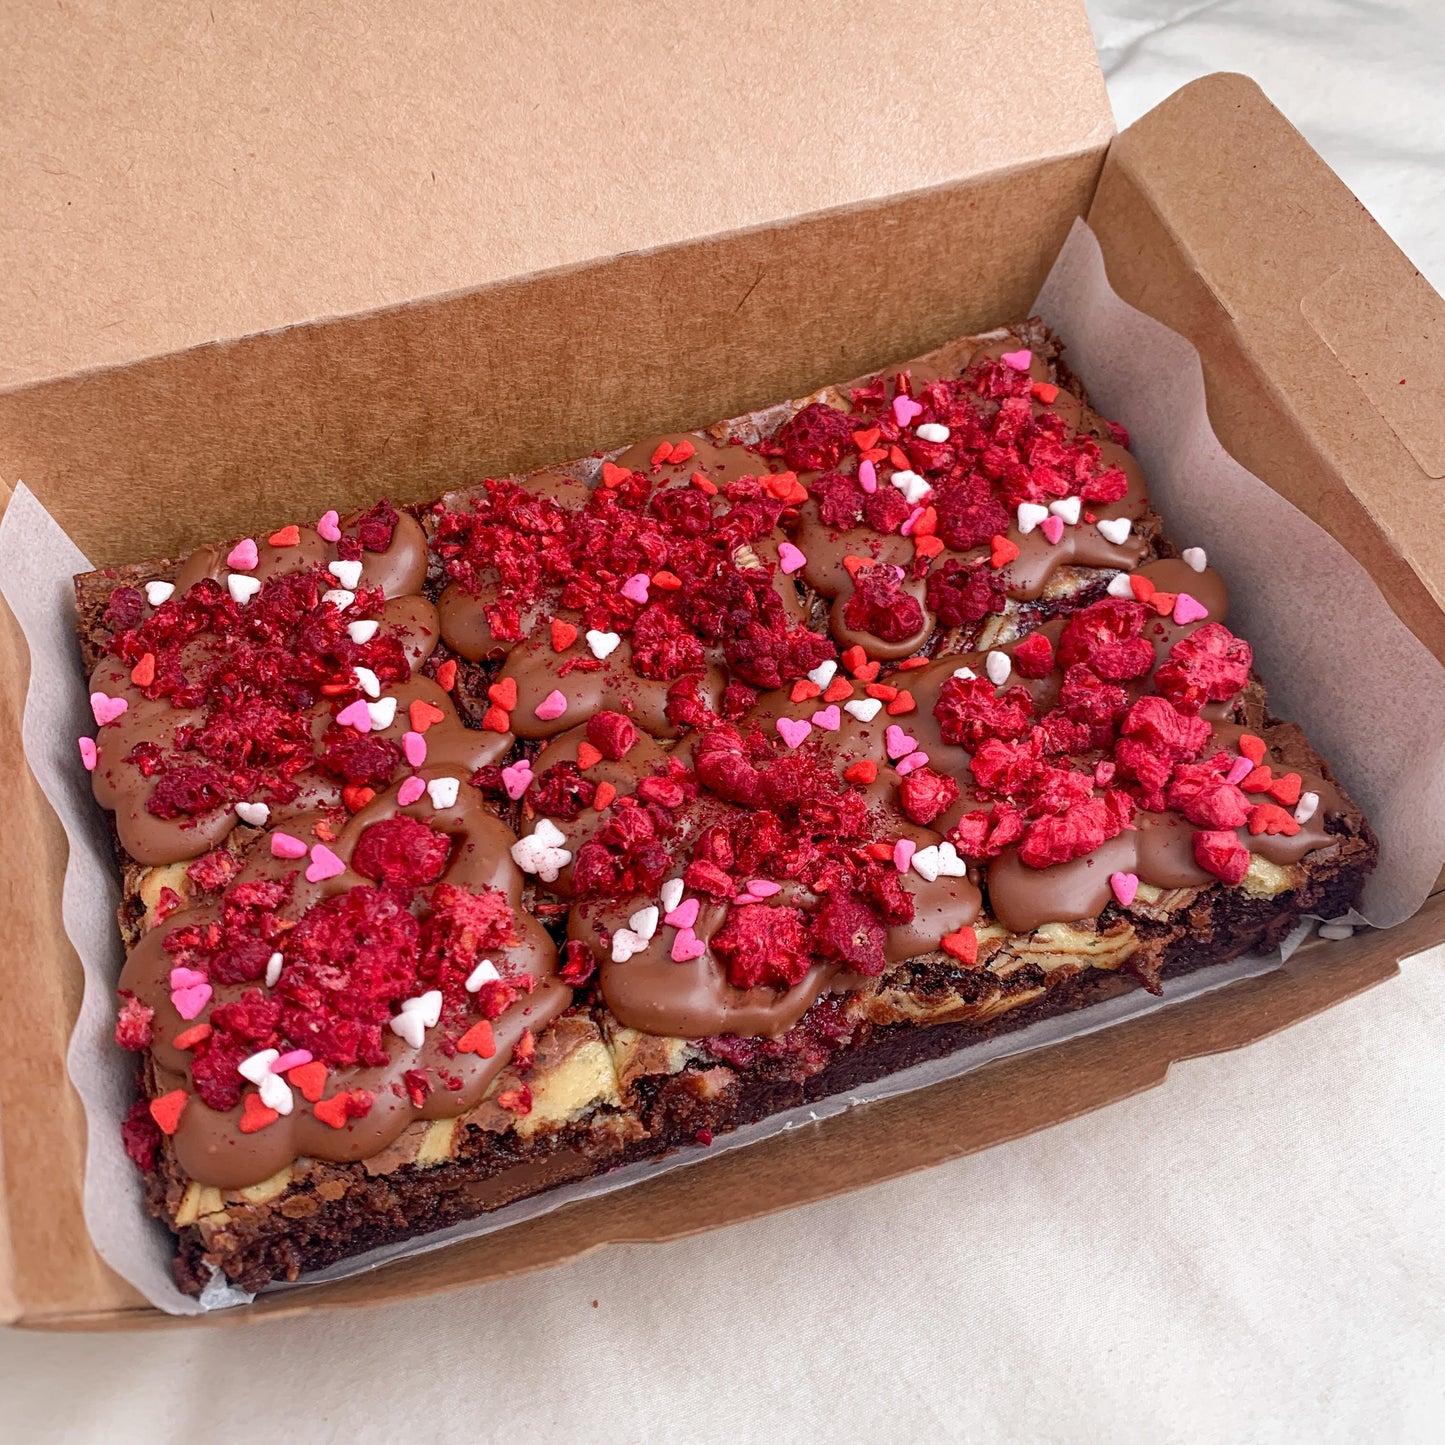 Our delicious chocolate brownie with swirls of cheesecake sauce and raspberry compote baked into it and topped with some freezedried raspberries!